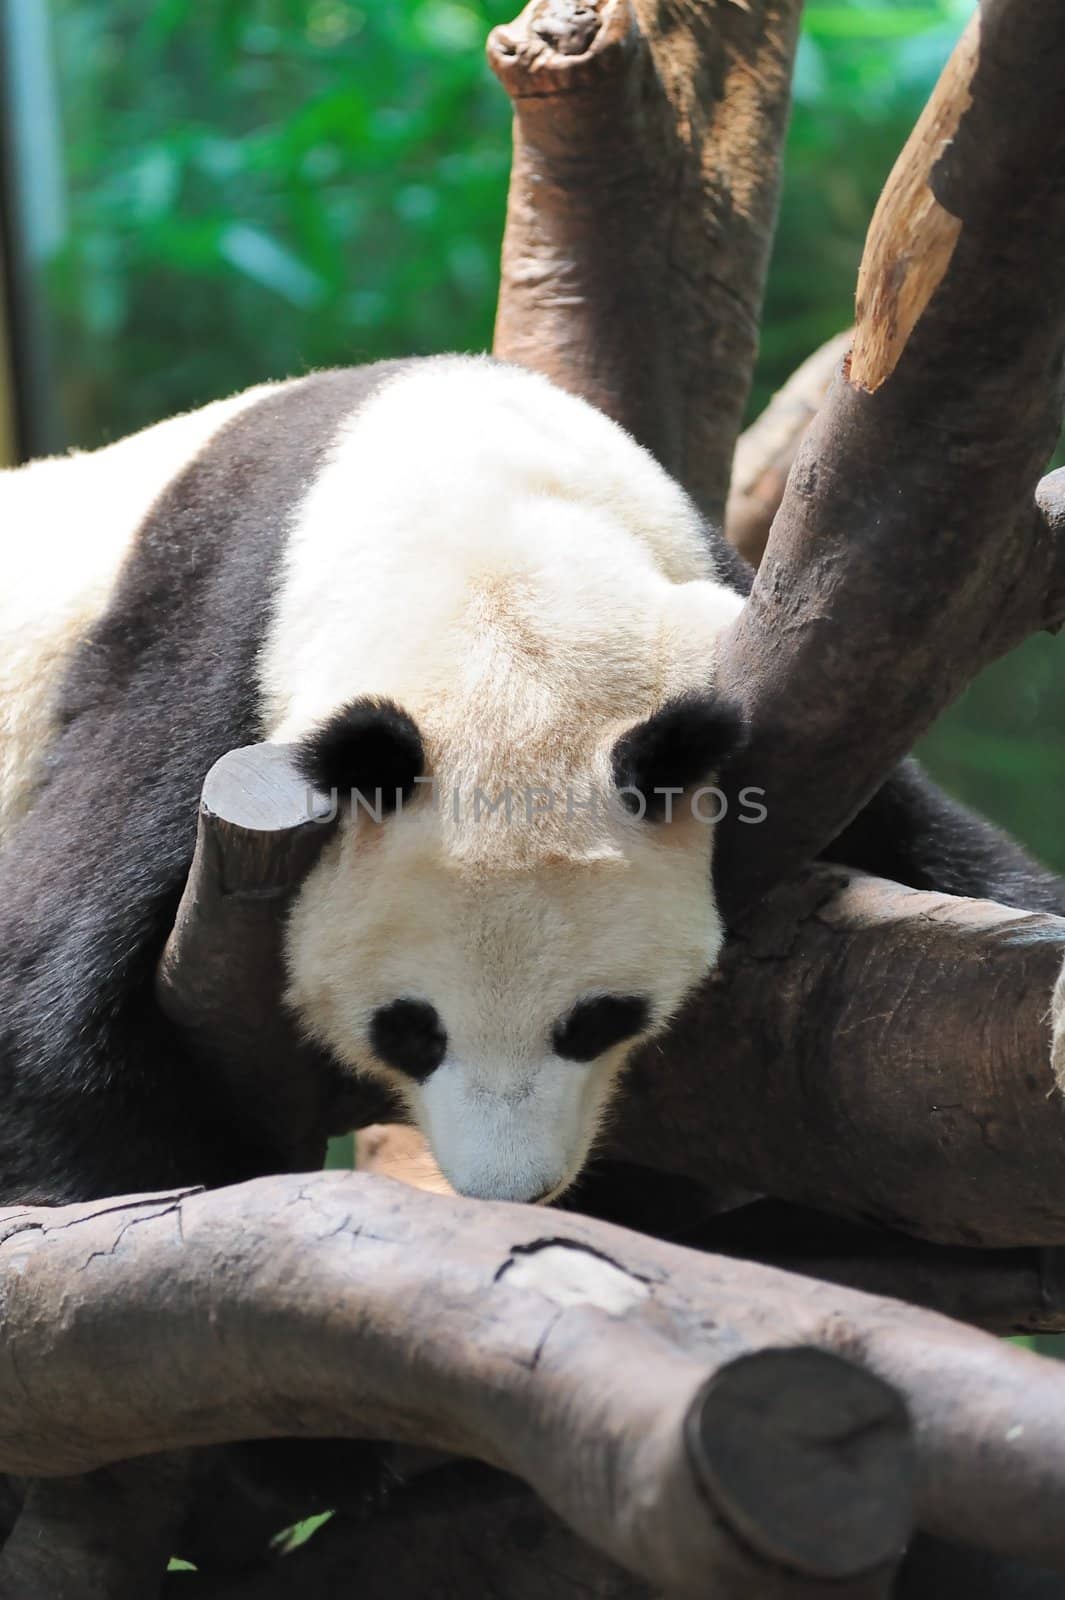 A giant panda lying on the tree branch and sleeping